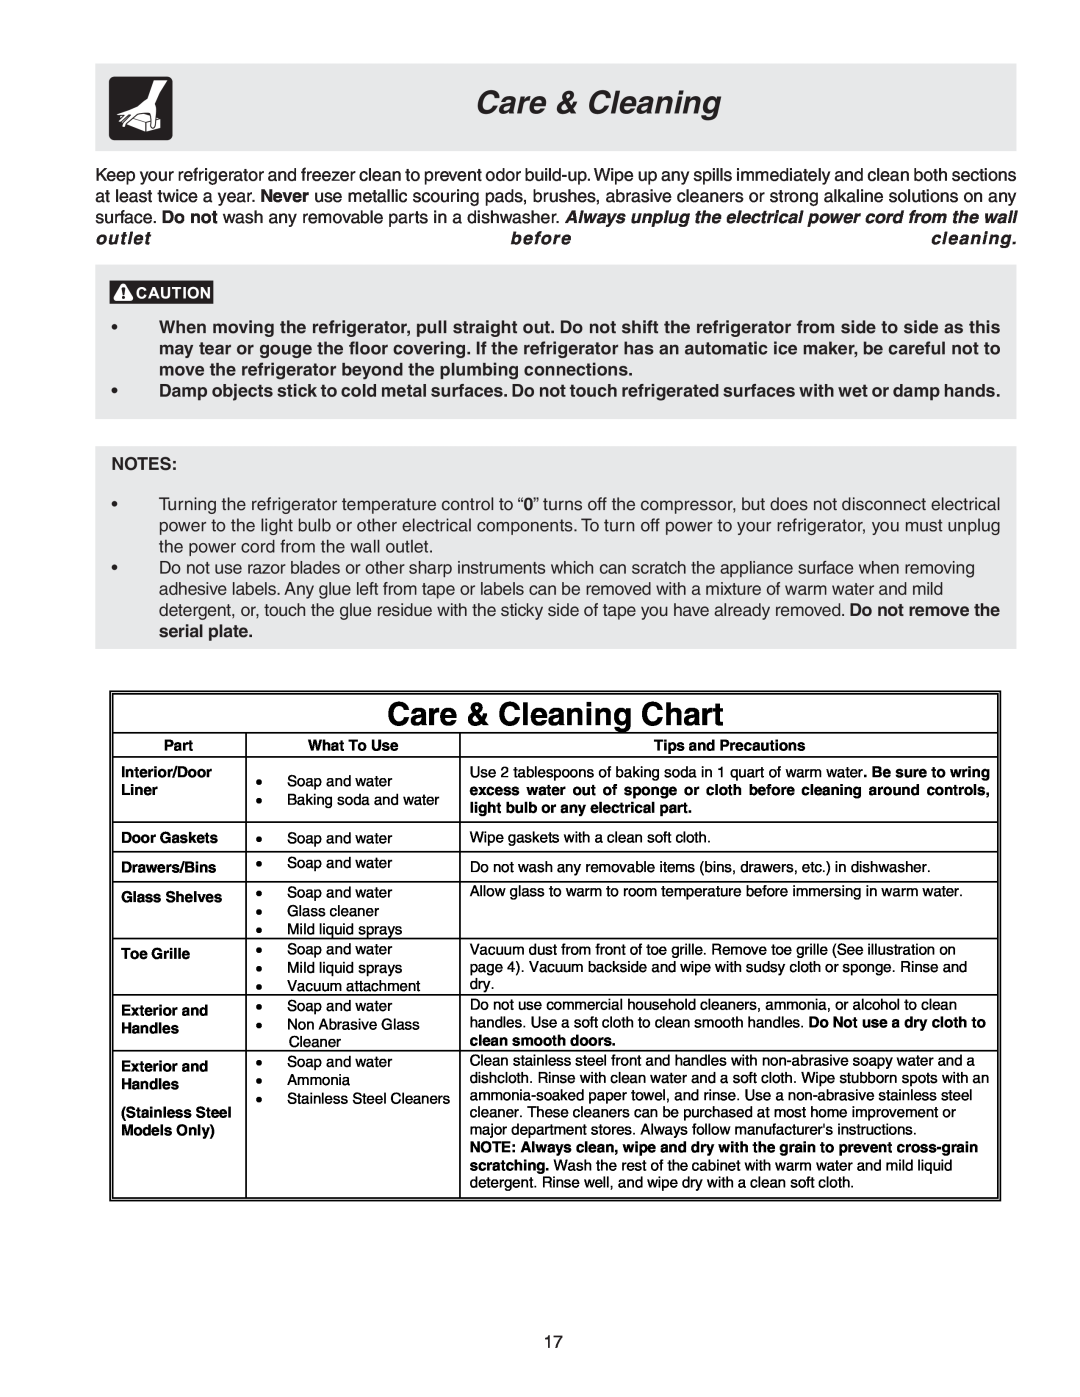 Frigidaire 241567600 warranty Care & Cleaning Chart 